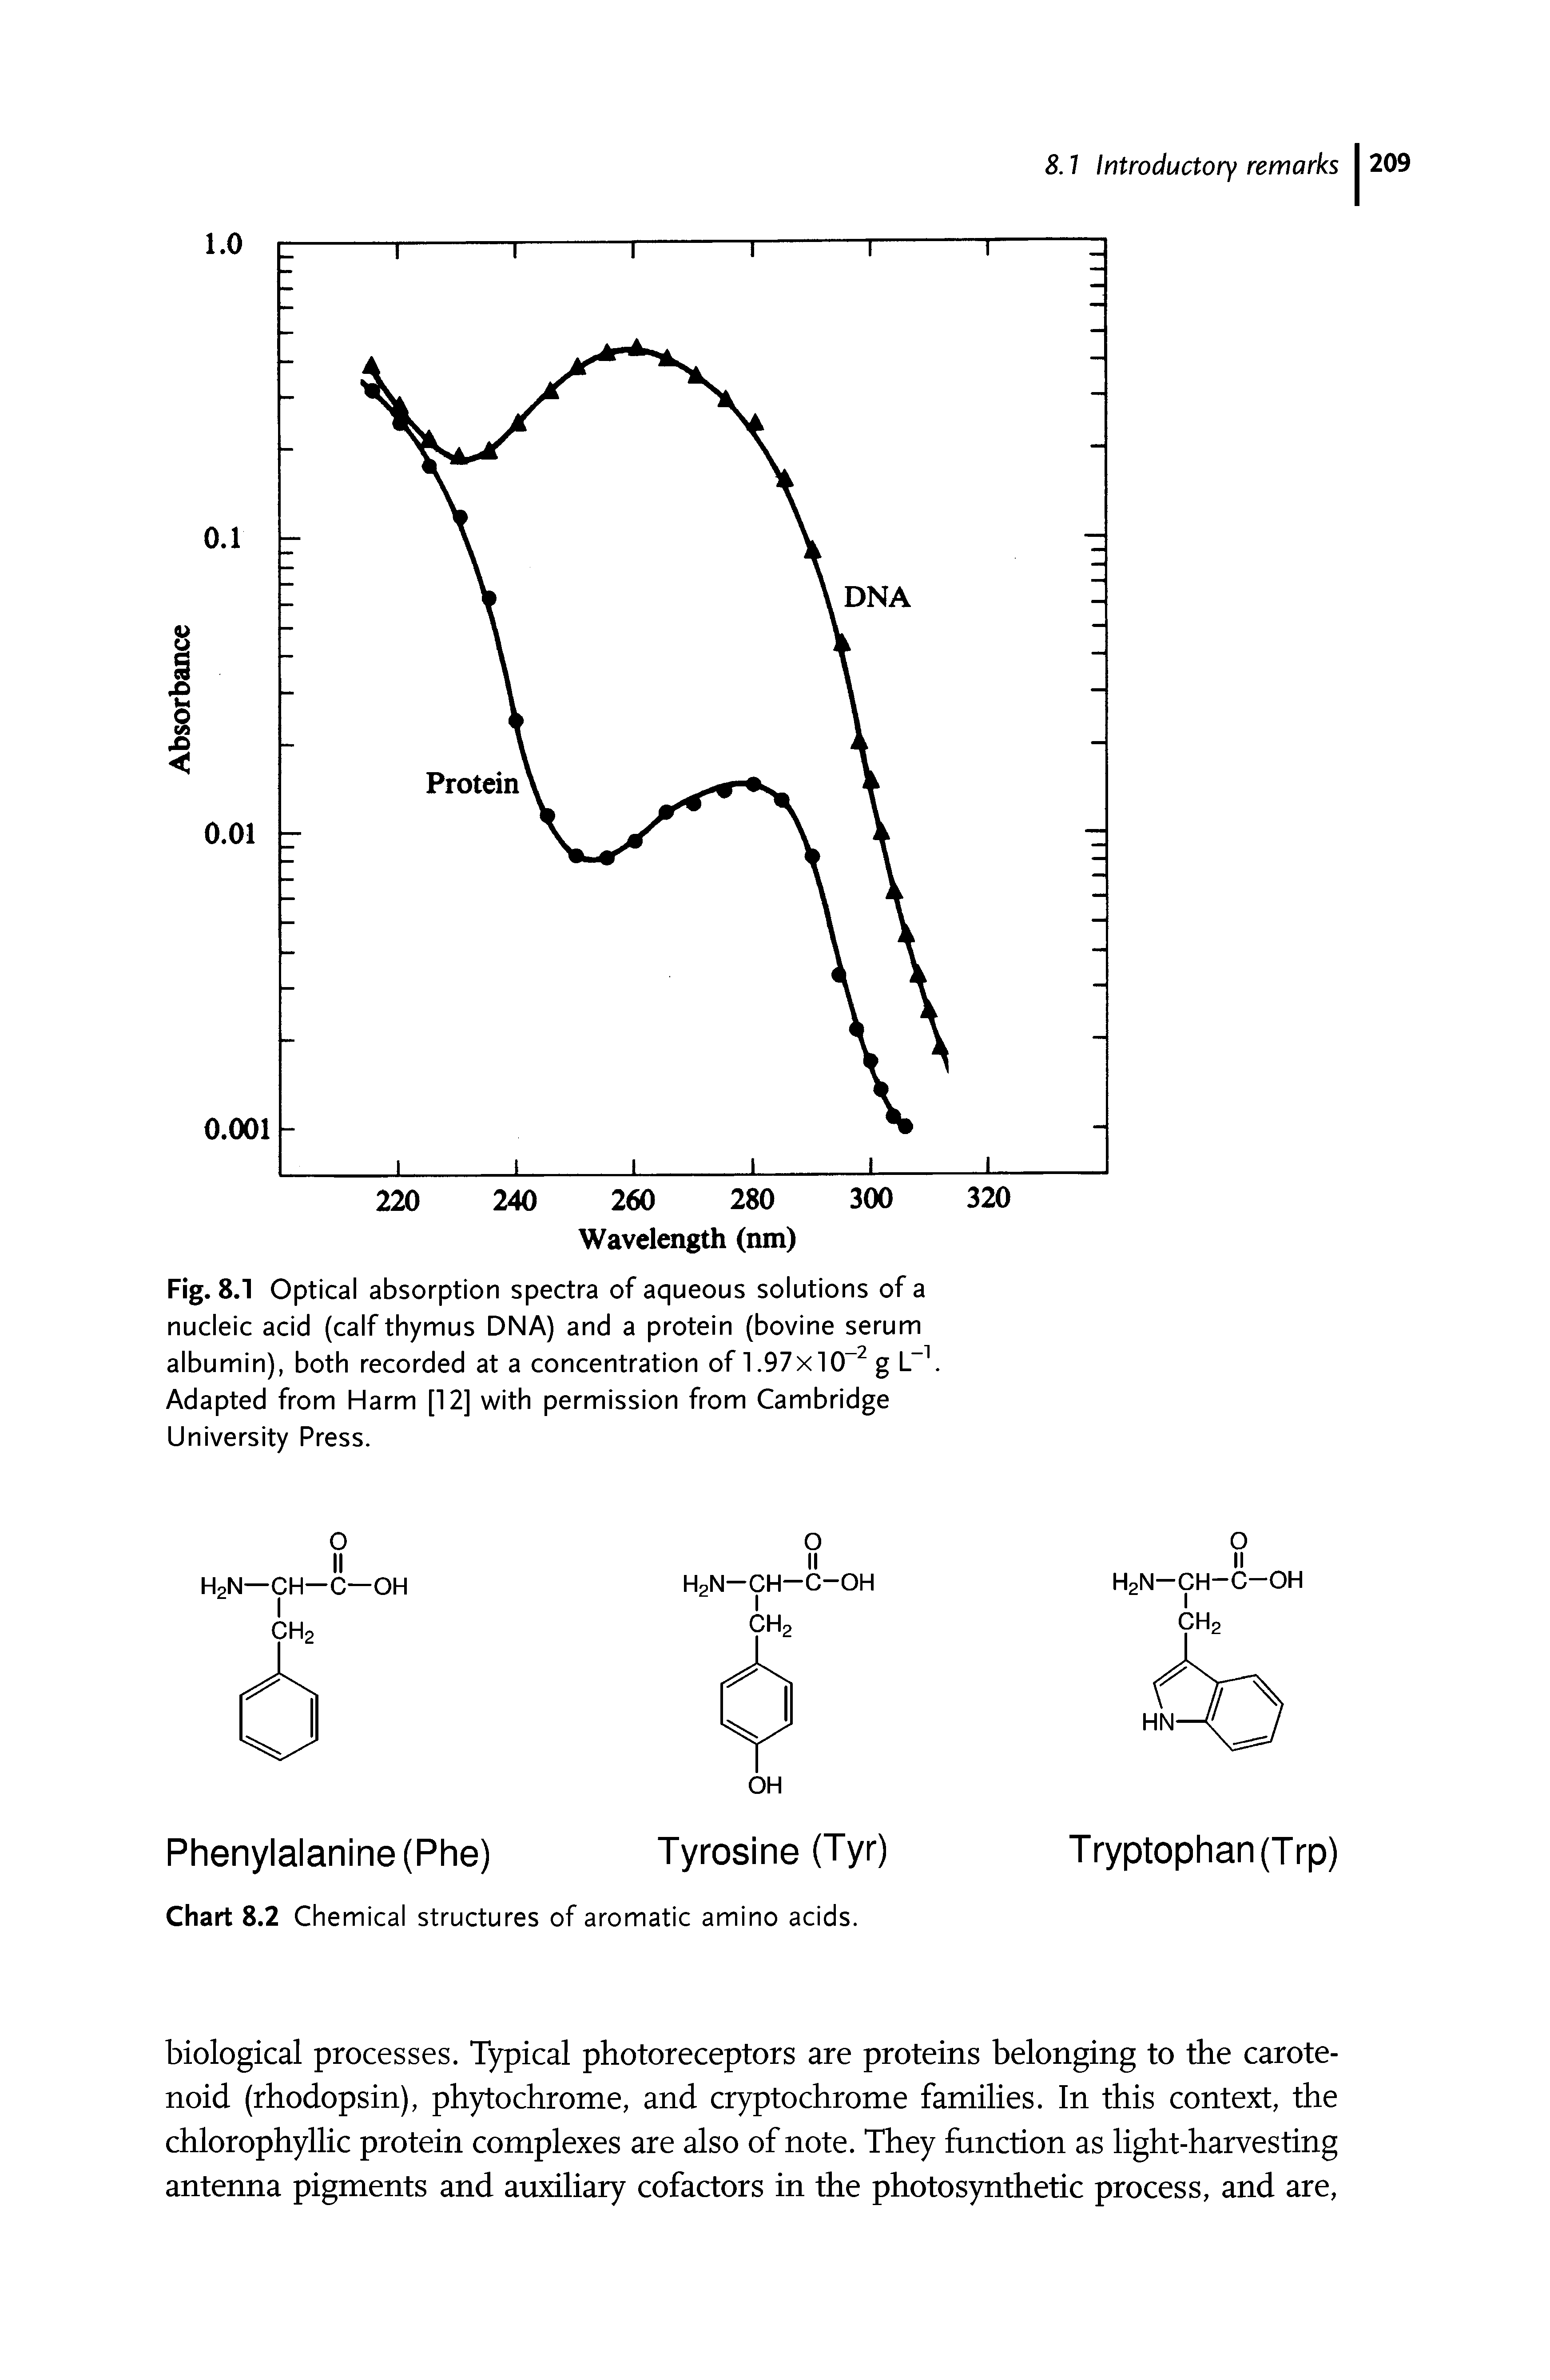 Fig. 8.1 Optical absorption spectra of aqueous solutions of a nucleic acid (calf thymus DNA) and a protein (bovine serum albumin), both recorded at a concentration of 1.97x10 g L" Adapted from Harm [12] with permission from Cambridge University Press.